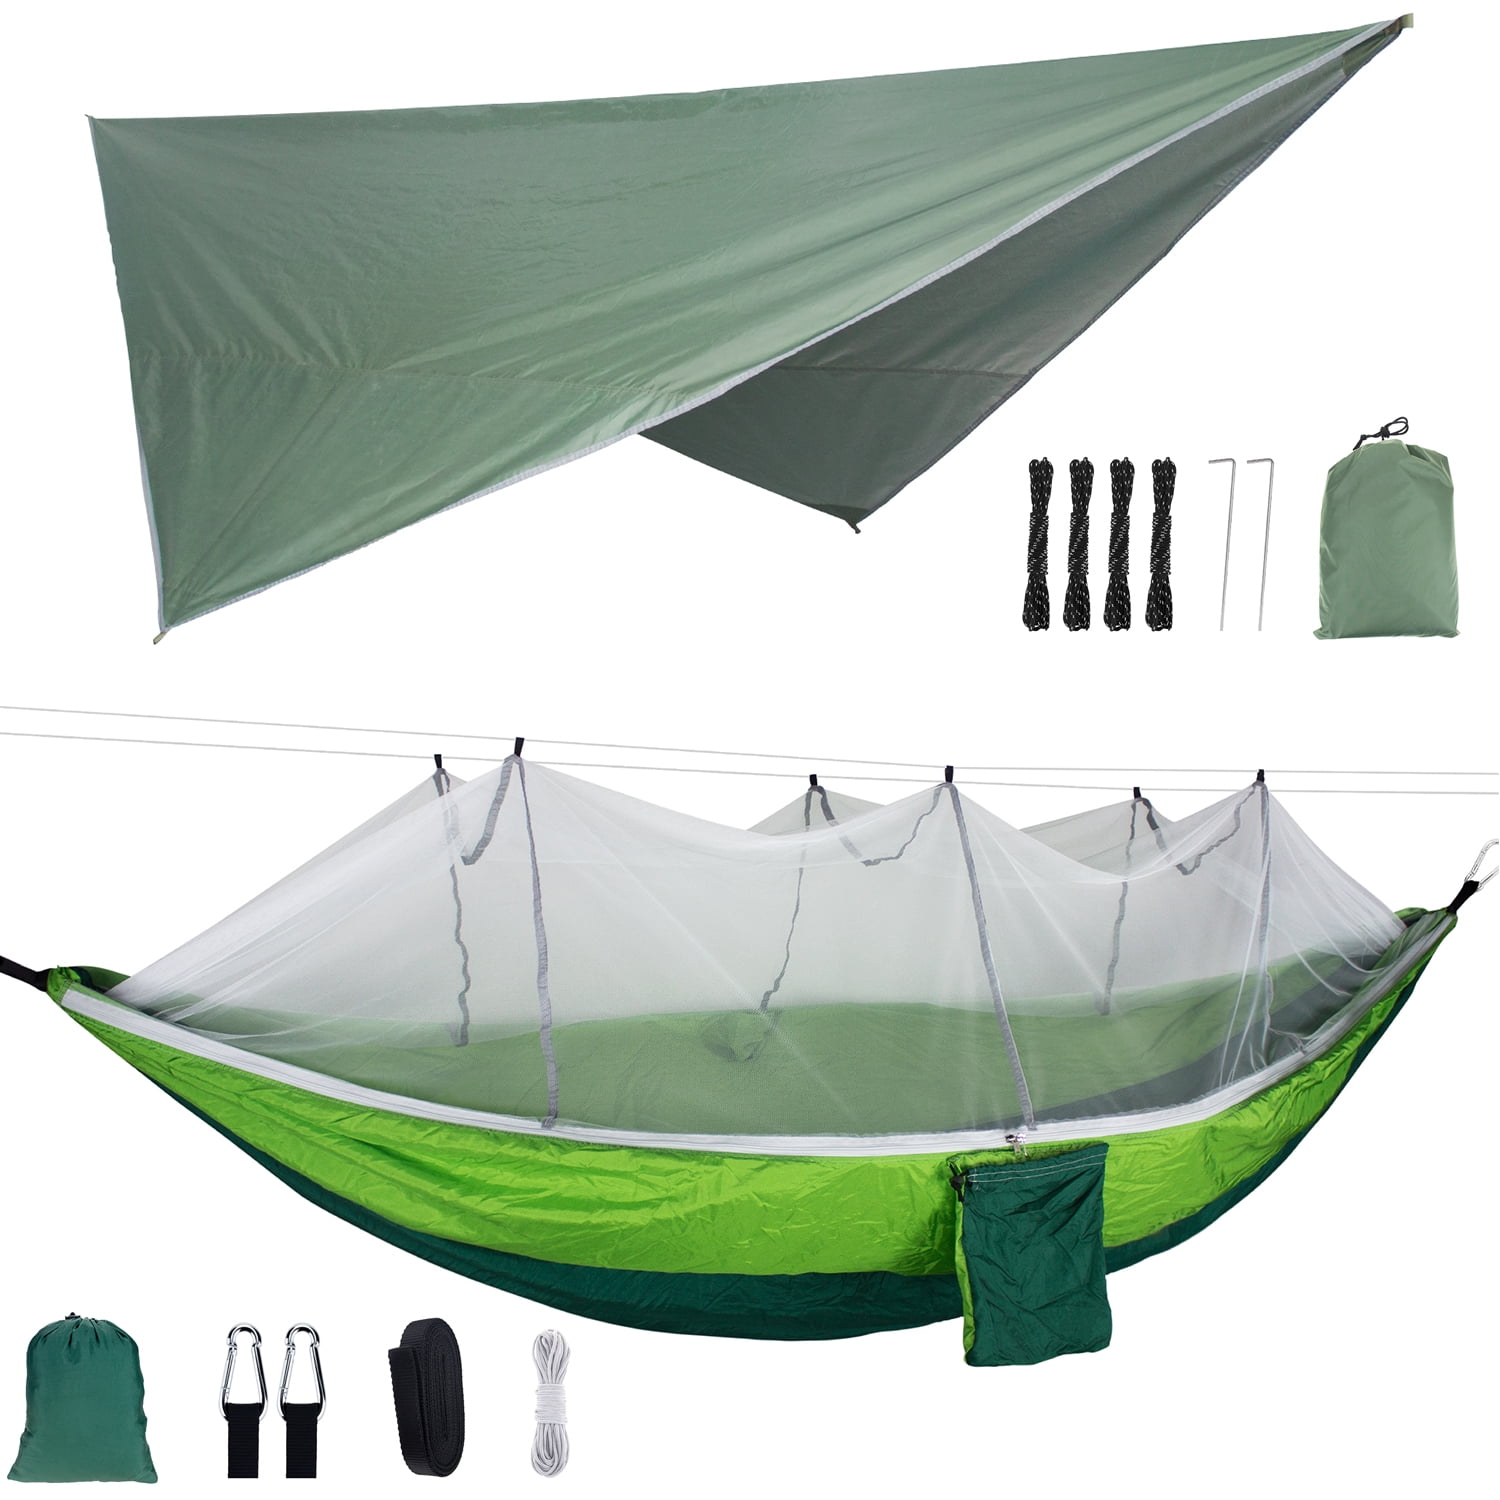 Details about   Double Person Camping Tent Hanging Hammock Bed with Mosquito Net Portable Set 